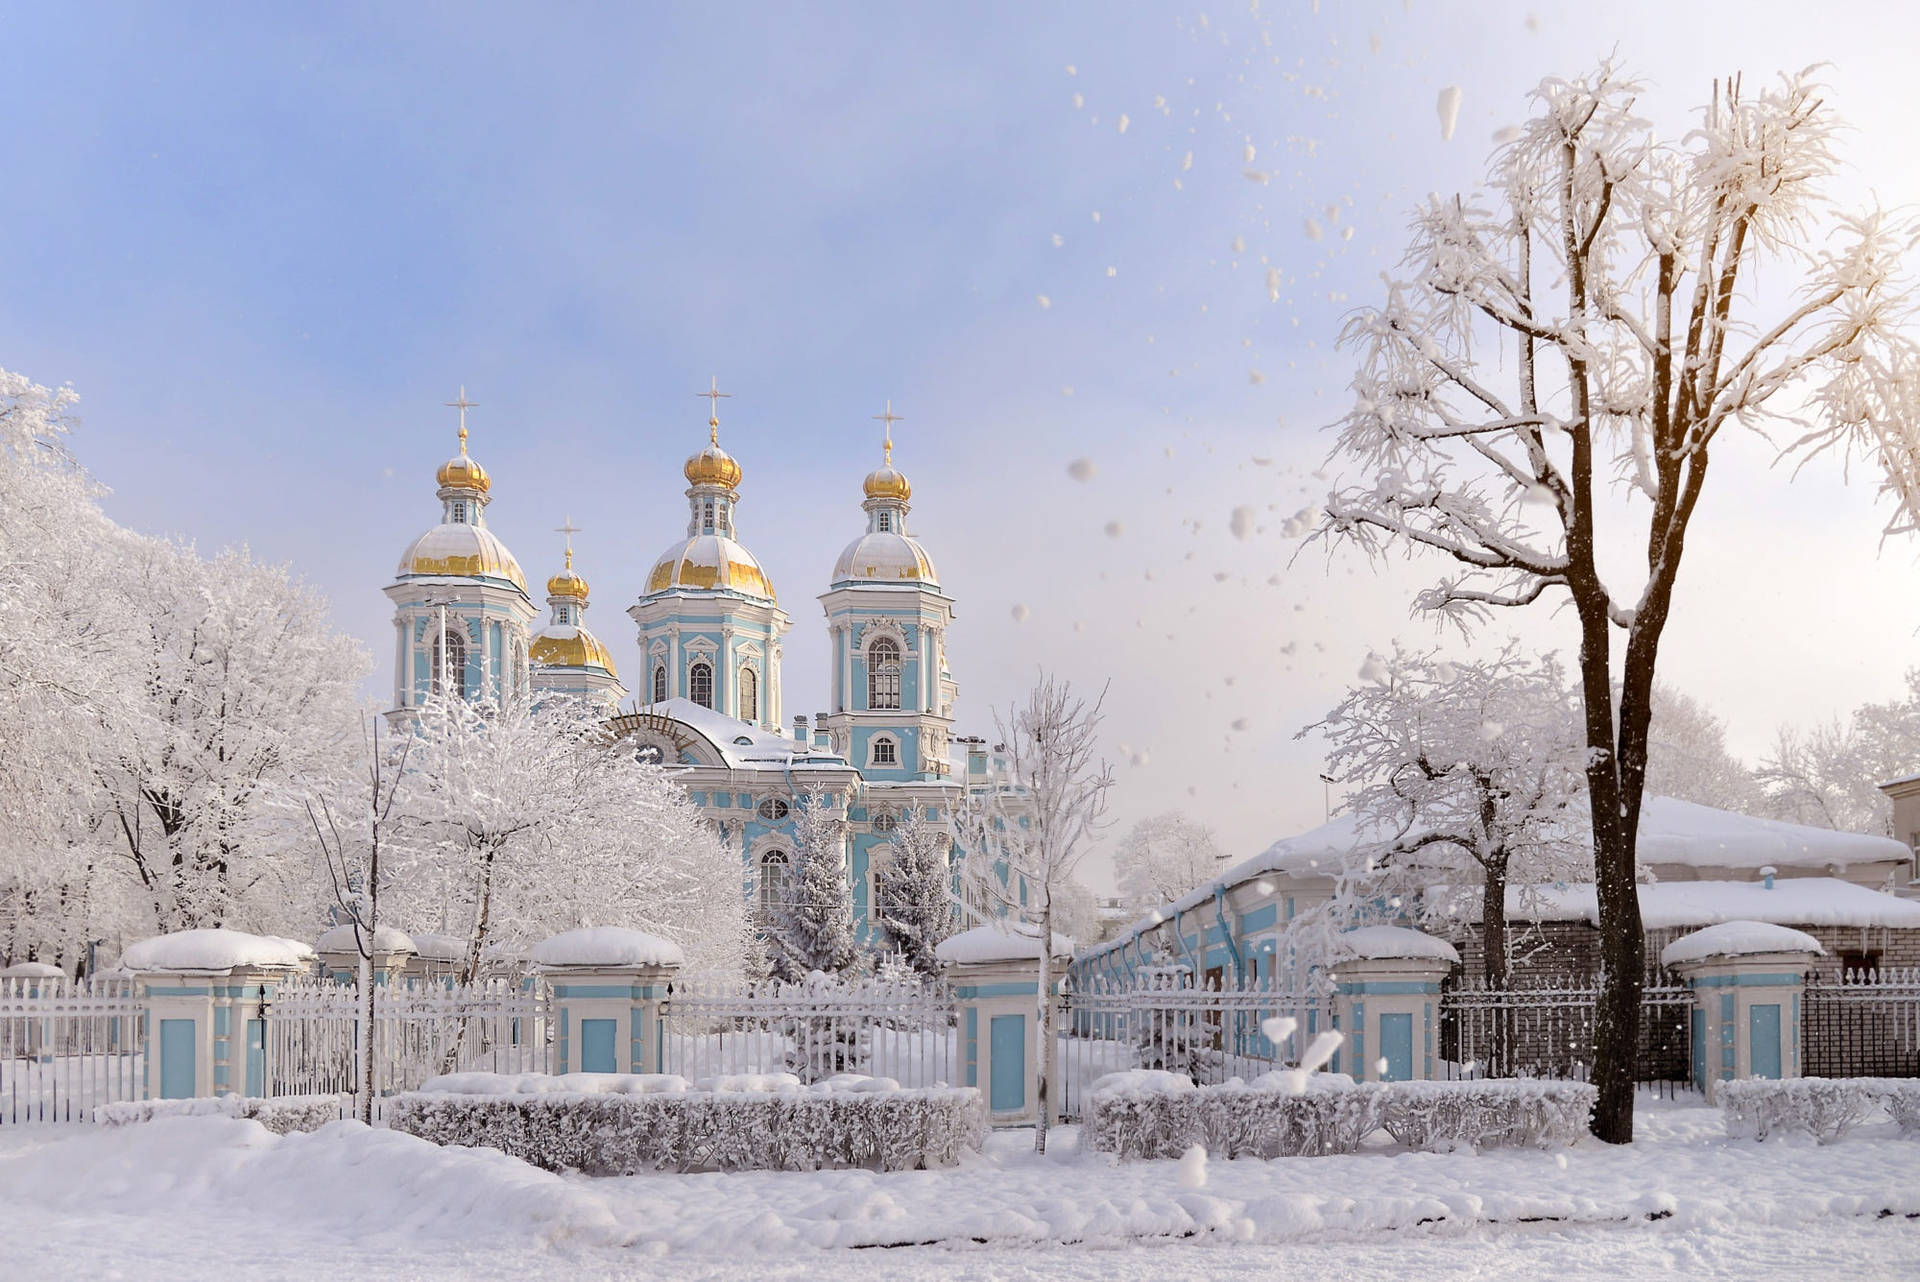 St. Nicholas Naval Cathedral Russia